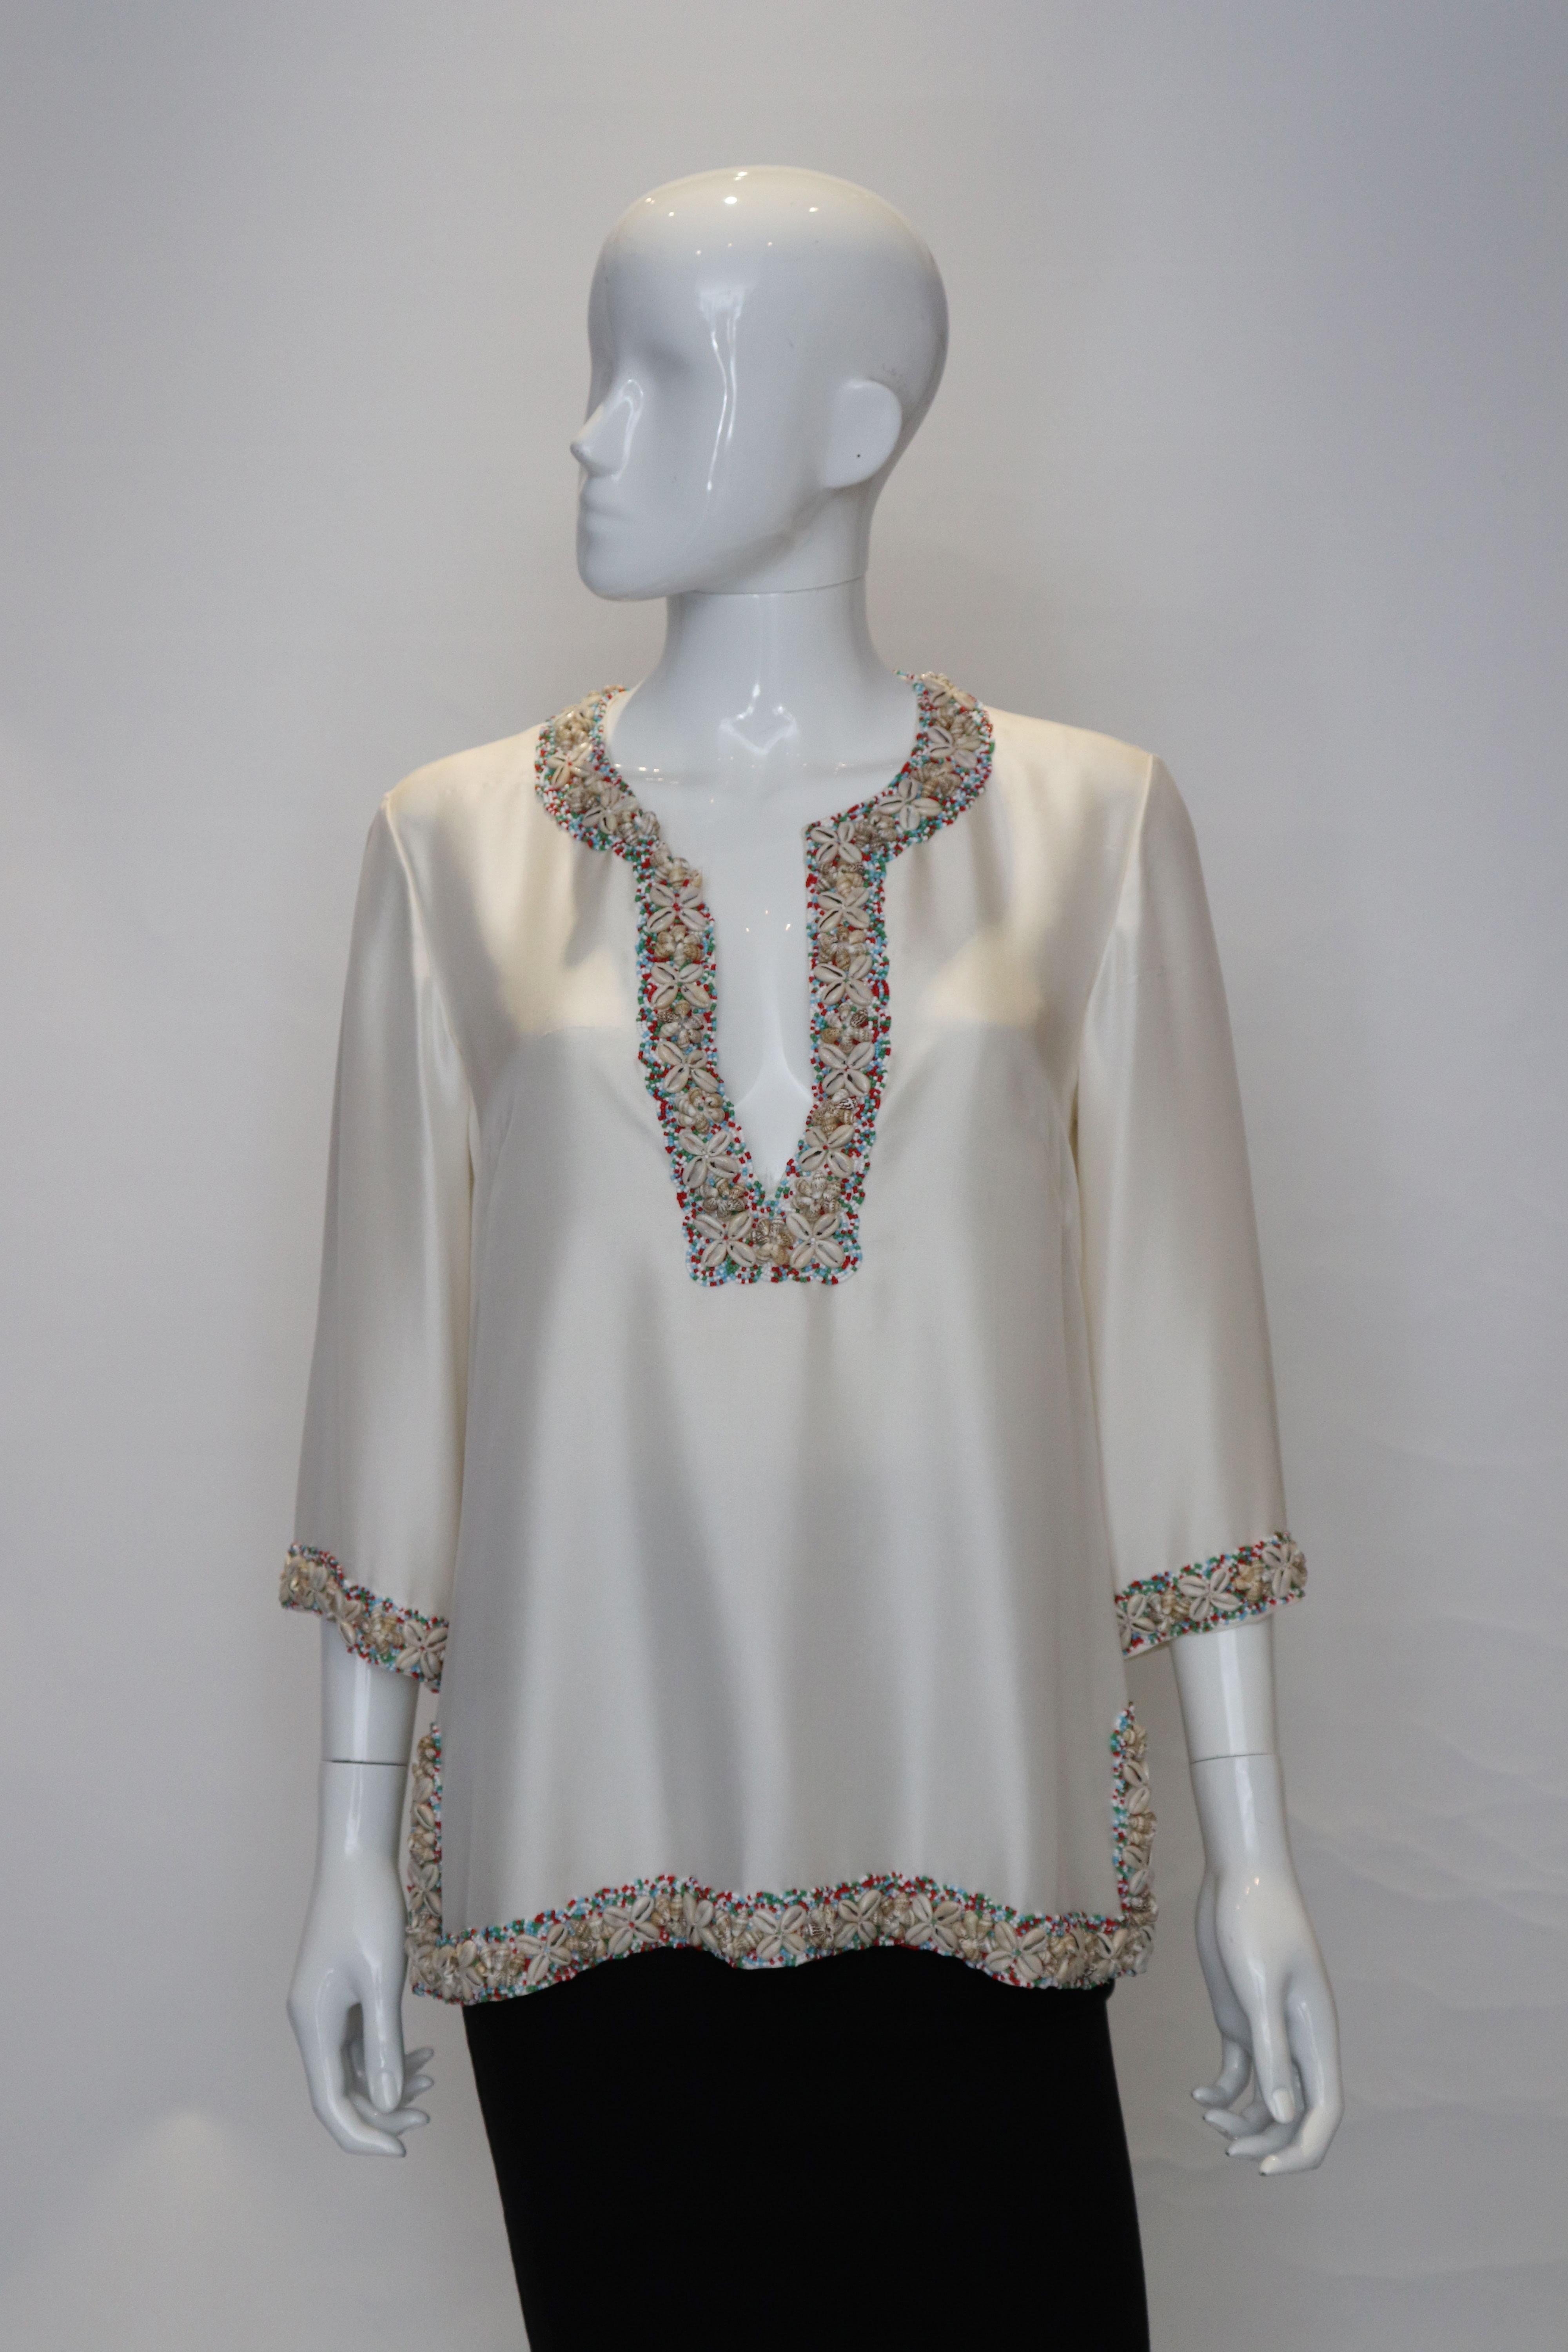 A stunning ivory kafta top with bead and shell decoration.
The kaftan is lined in silk and has 4'' slits on either side. It has a round neckline with a central opening with hook and eye fastening. It is quite heavy .